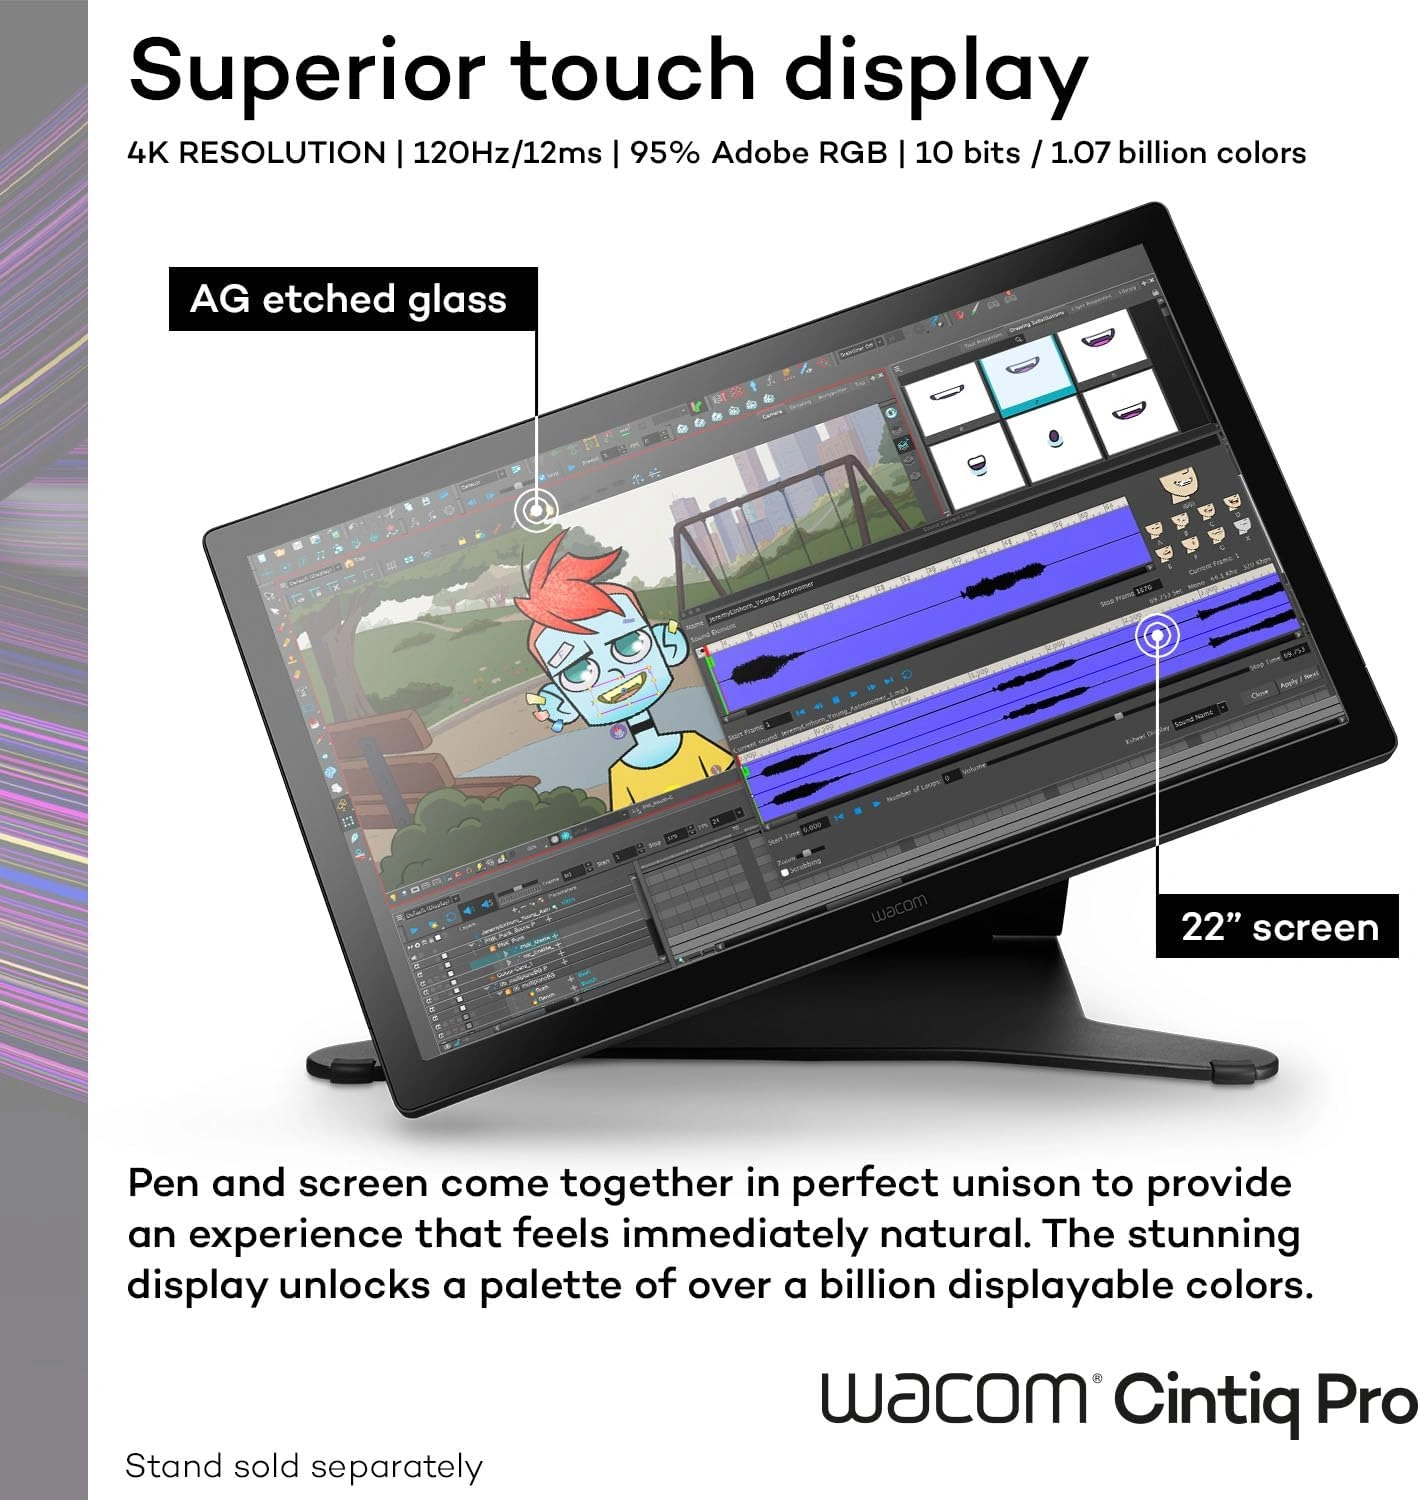 Wacom Cintiq Pro 22 Drawing Tablet with Screen; 4K UHD Touchscreen Graphic Drawing Monitor with 1.07 Billion Colors, 120Hz Refresh Rate &amp; 8192 Pen Pressure for Windows PC, Mac, Linux-2